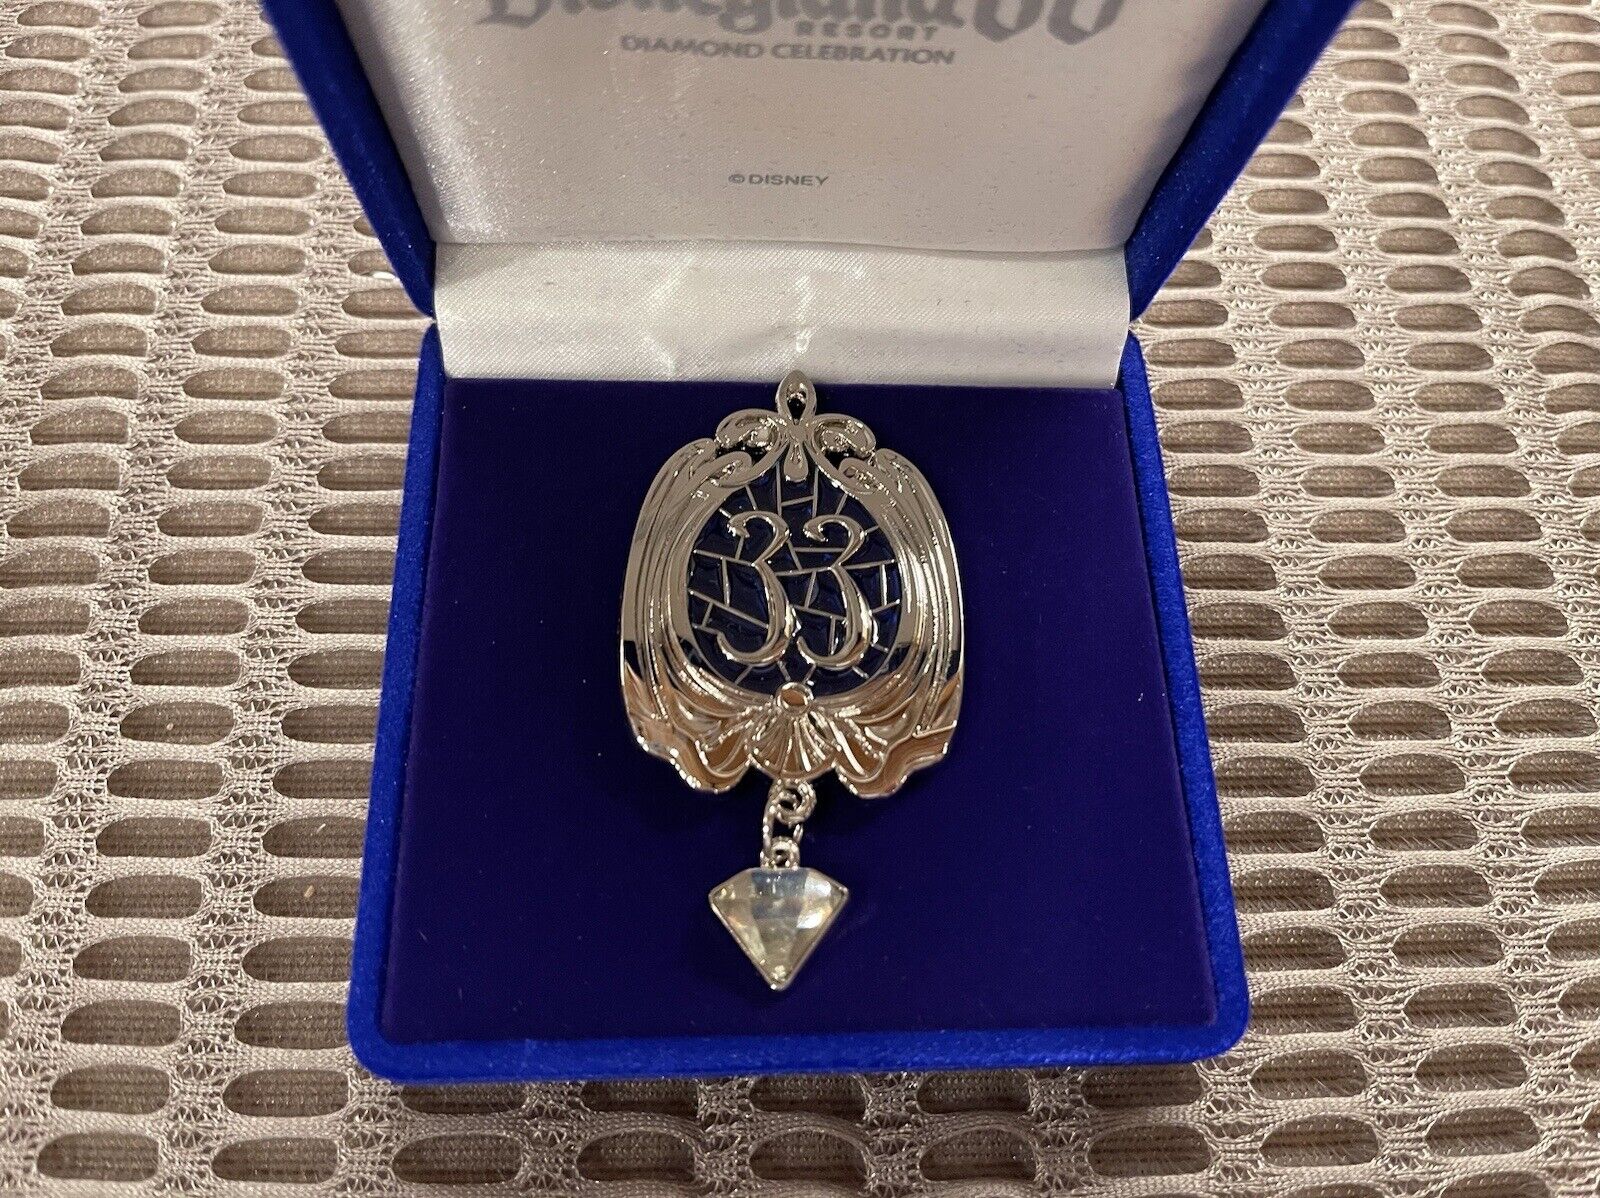 Club 33 Exclusive Disneyland 60th Diamond Anniversary Pin In Blue Box- Sold Out